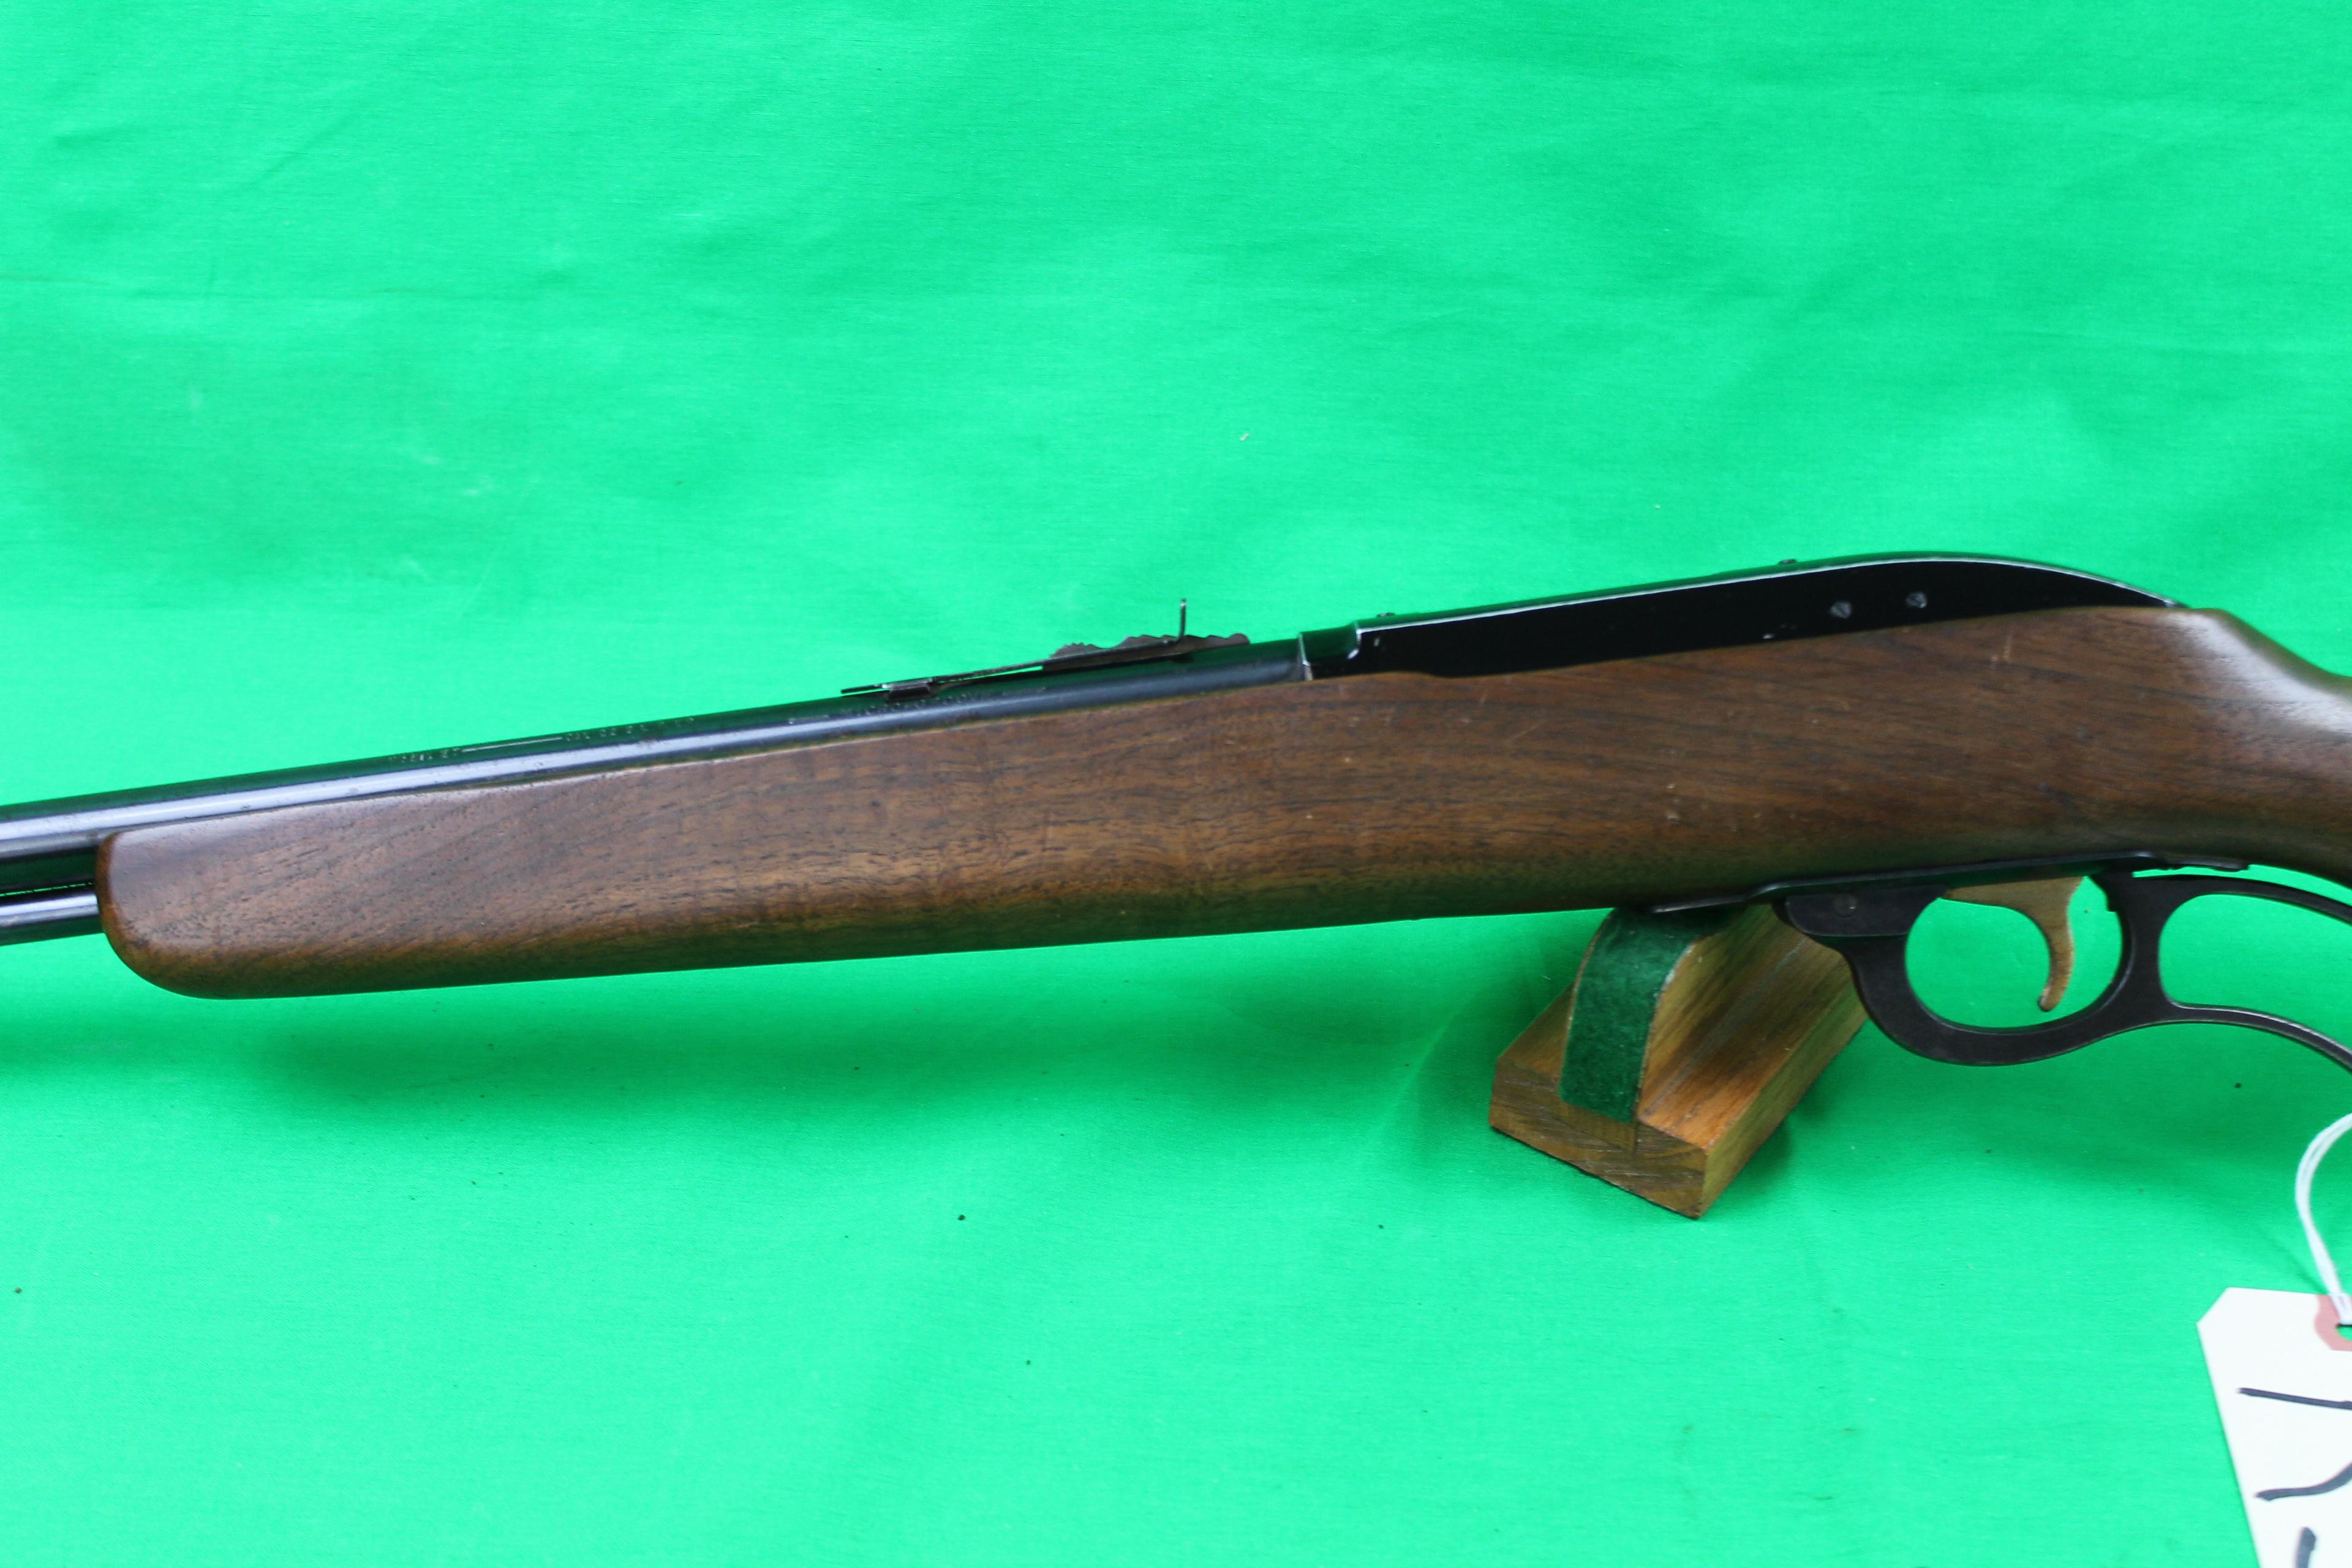 Mossberg 57 22 Lever Action